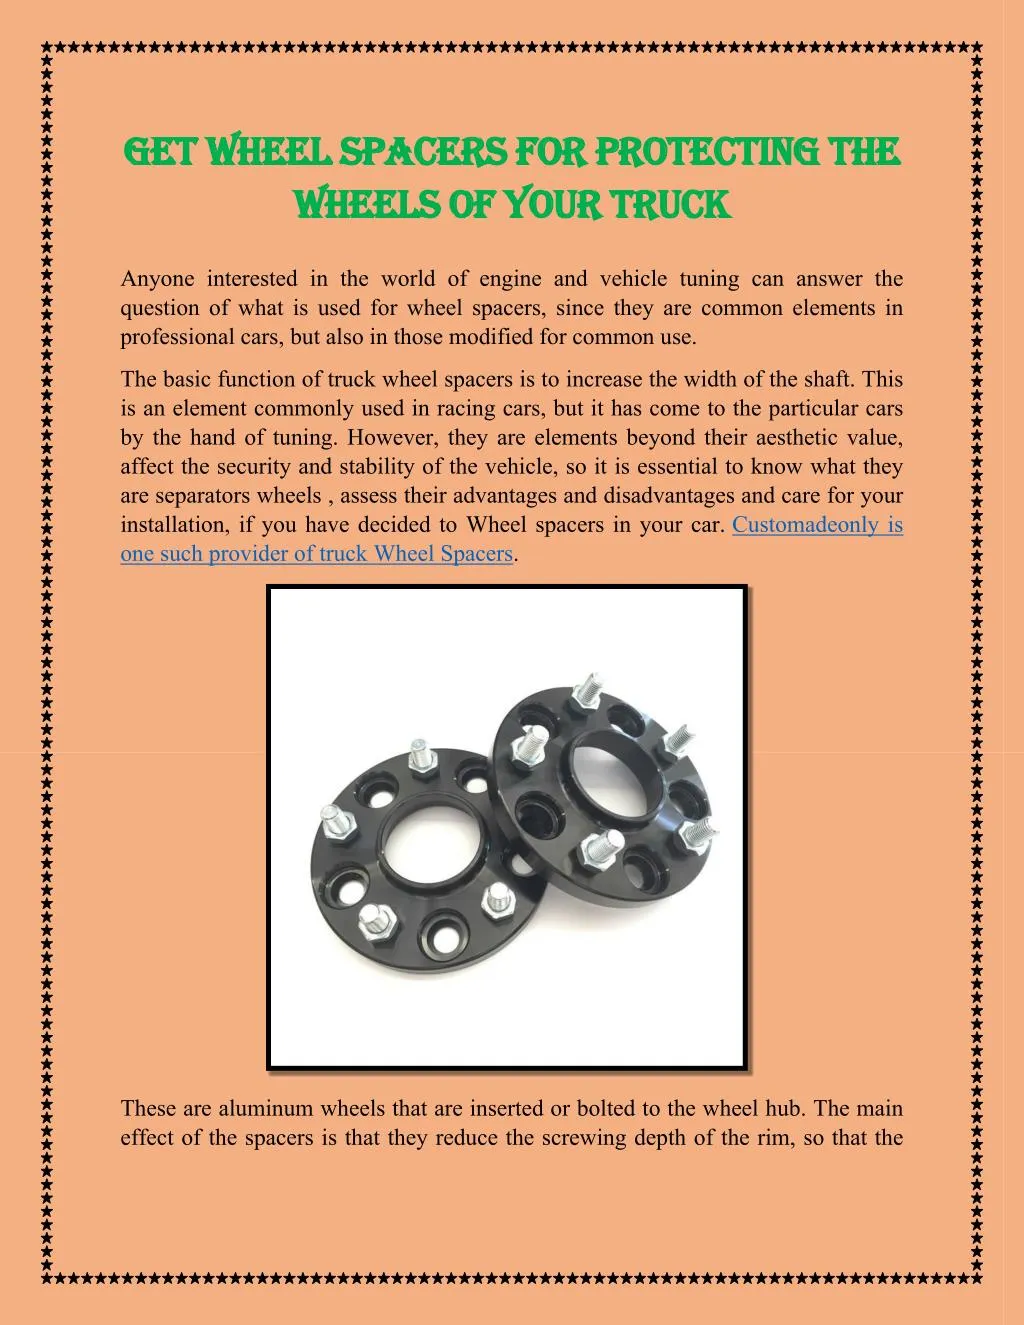 get wheel spacers for protecting the wheels